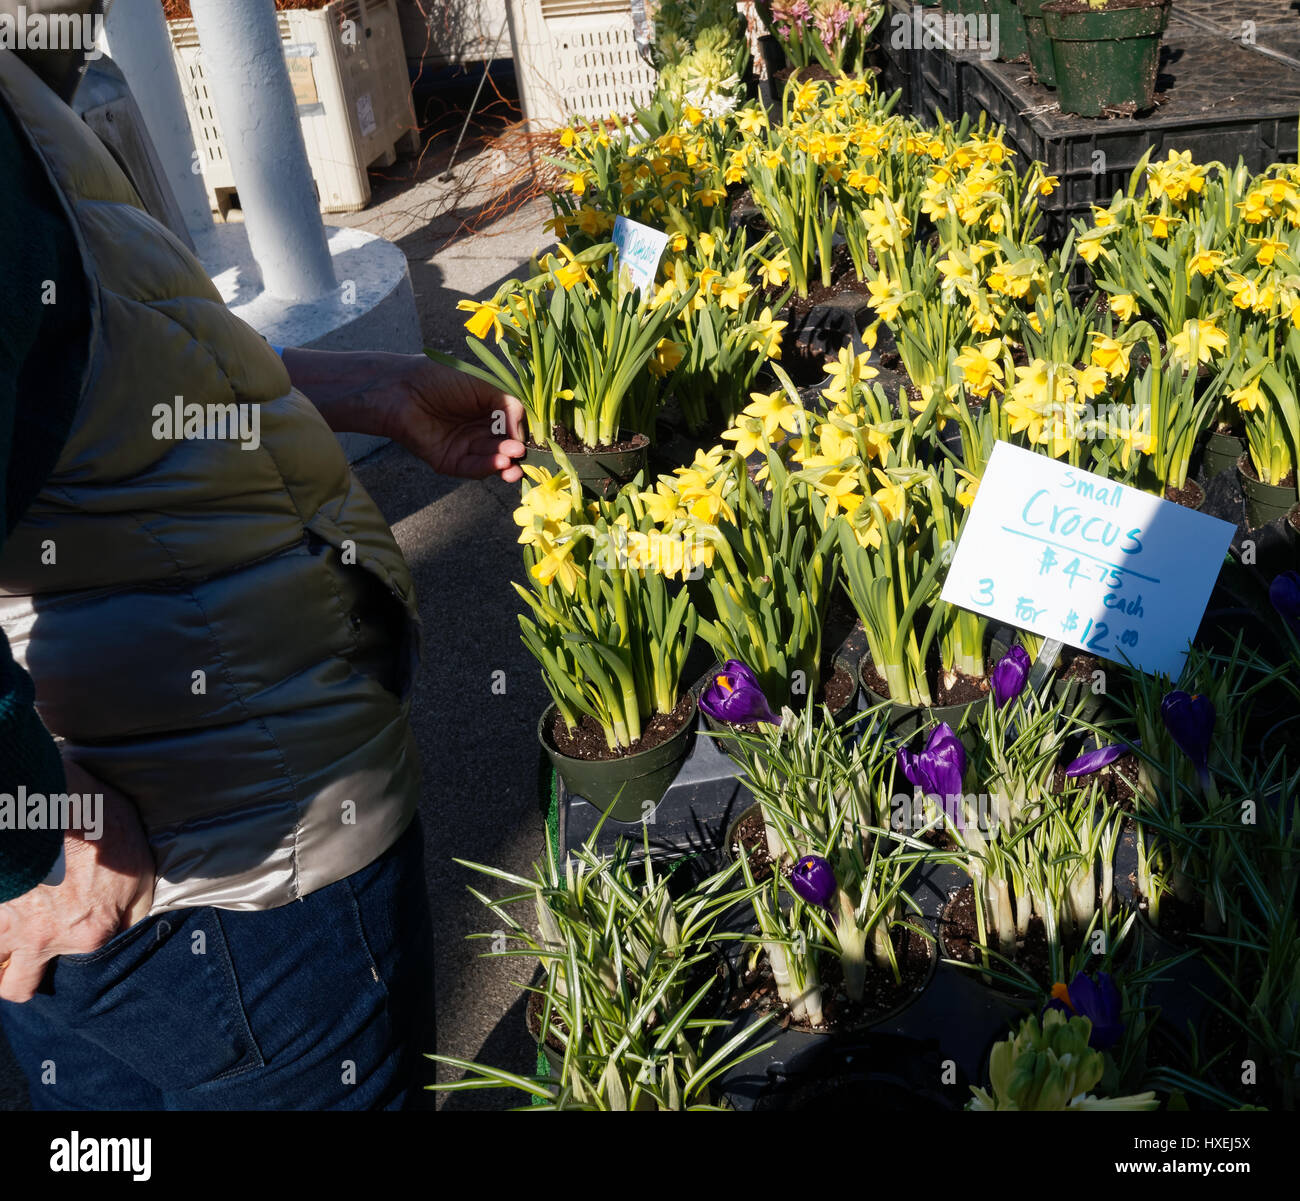 Blooming bulbs in yellow and purple. Plants for sale at the farmer's market. Stock Photo